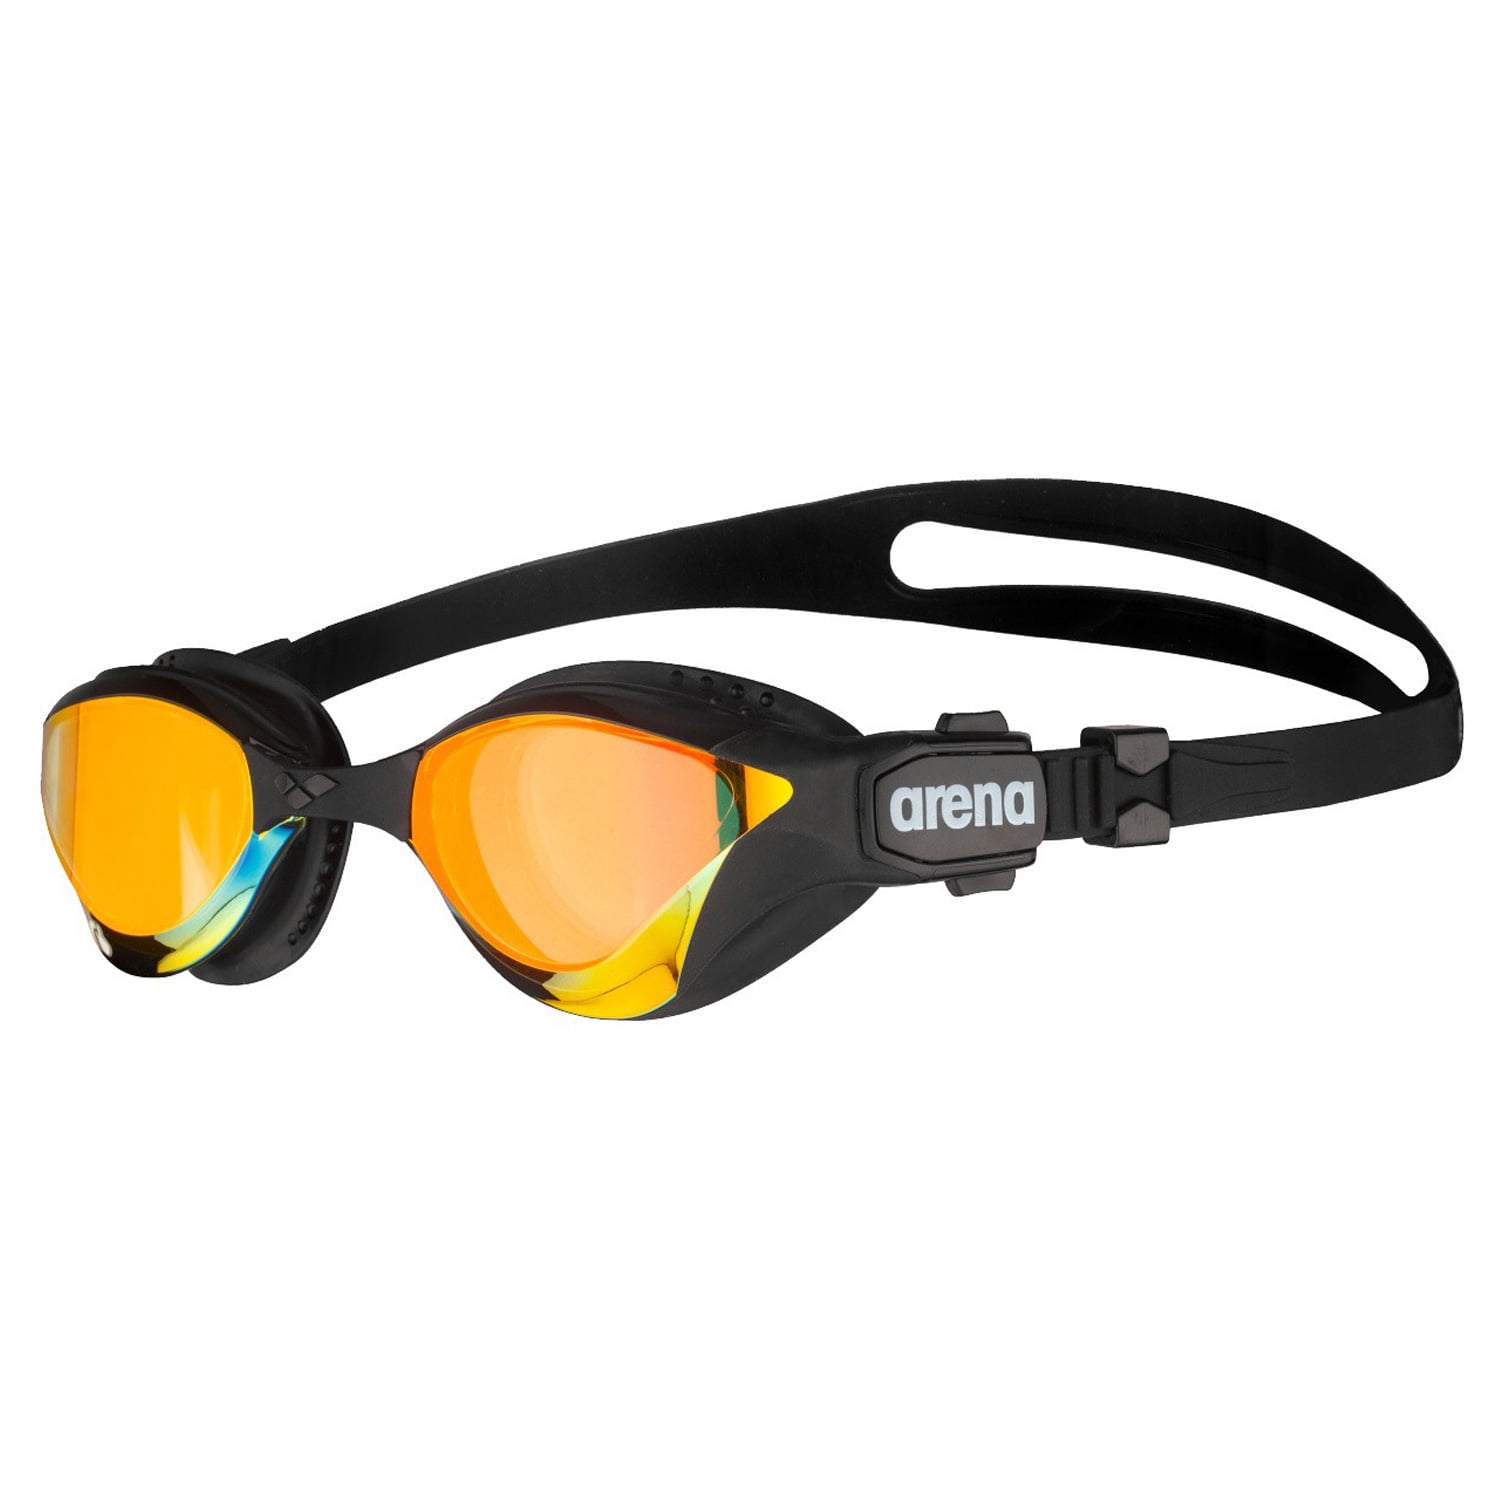 Arena Cobra Tri Goggle for Triathlon and with Swipe Anti-Fog, Easy to Adjust, Crystal Clear Wide with UV Protection, Silver/Black, Swipe Anti-Fog (New) Walmart.com